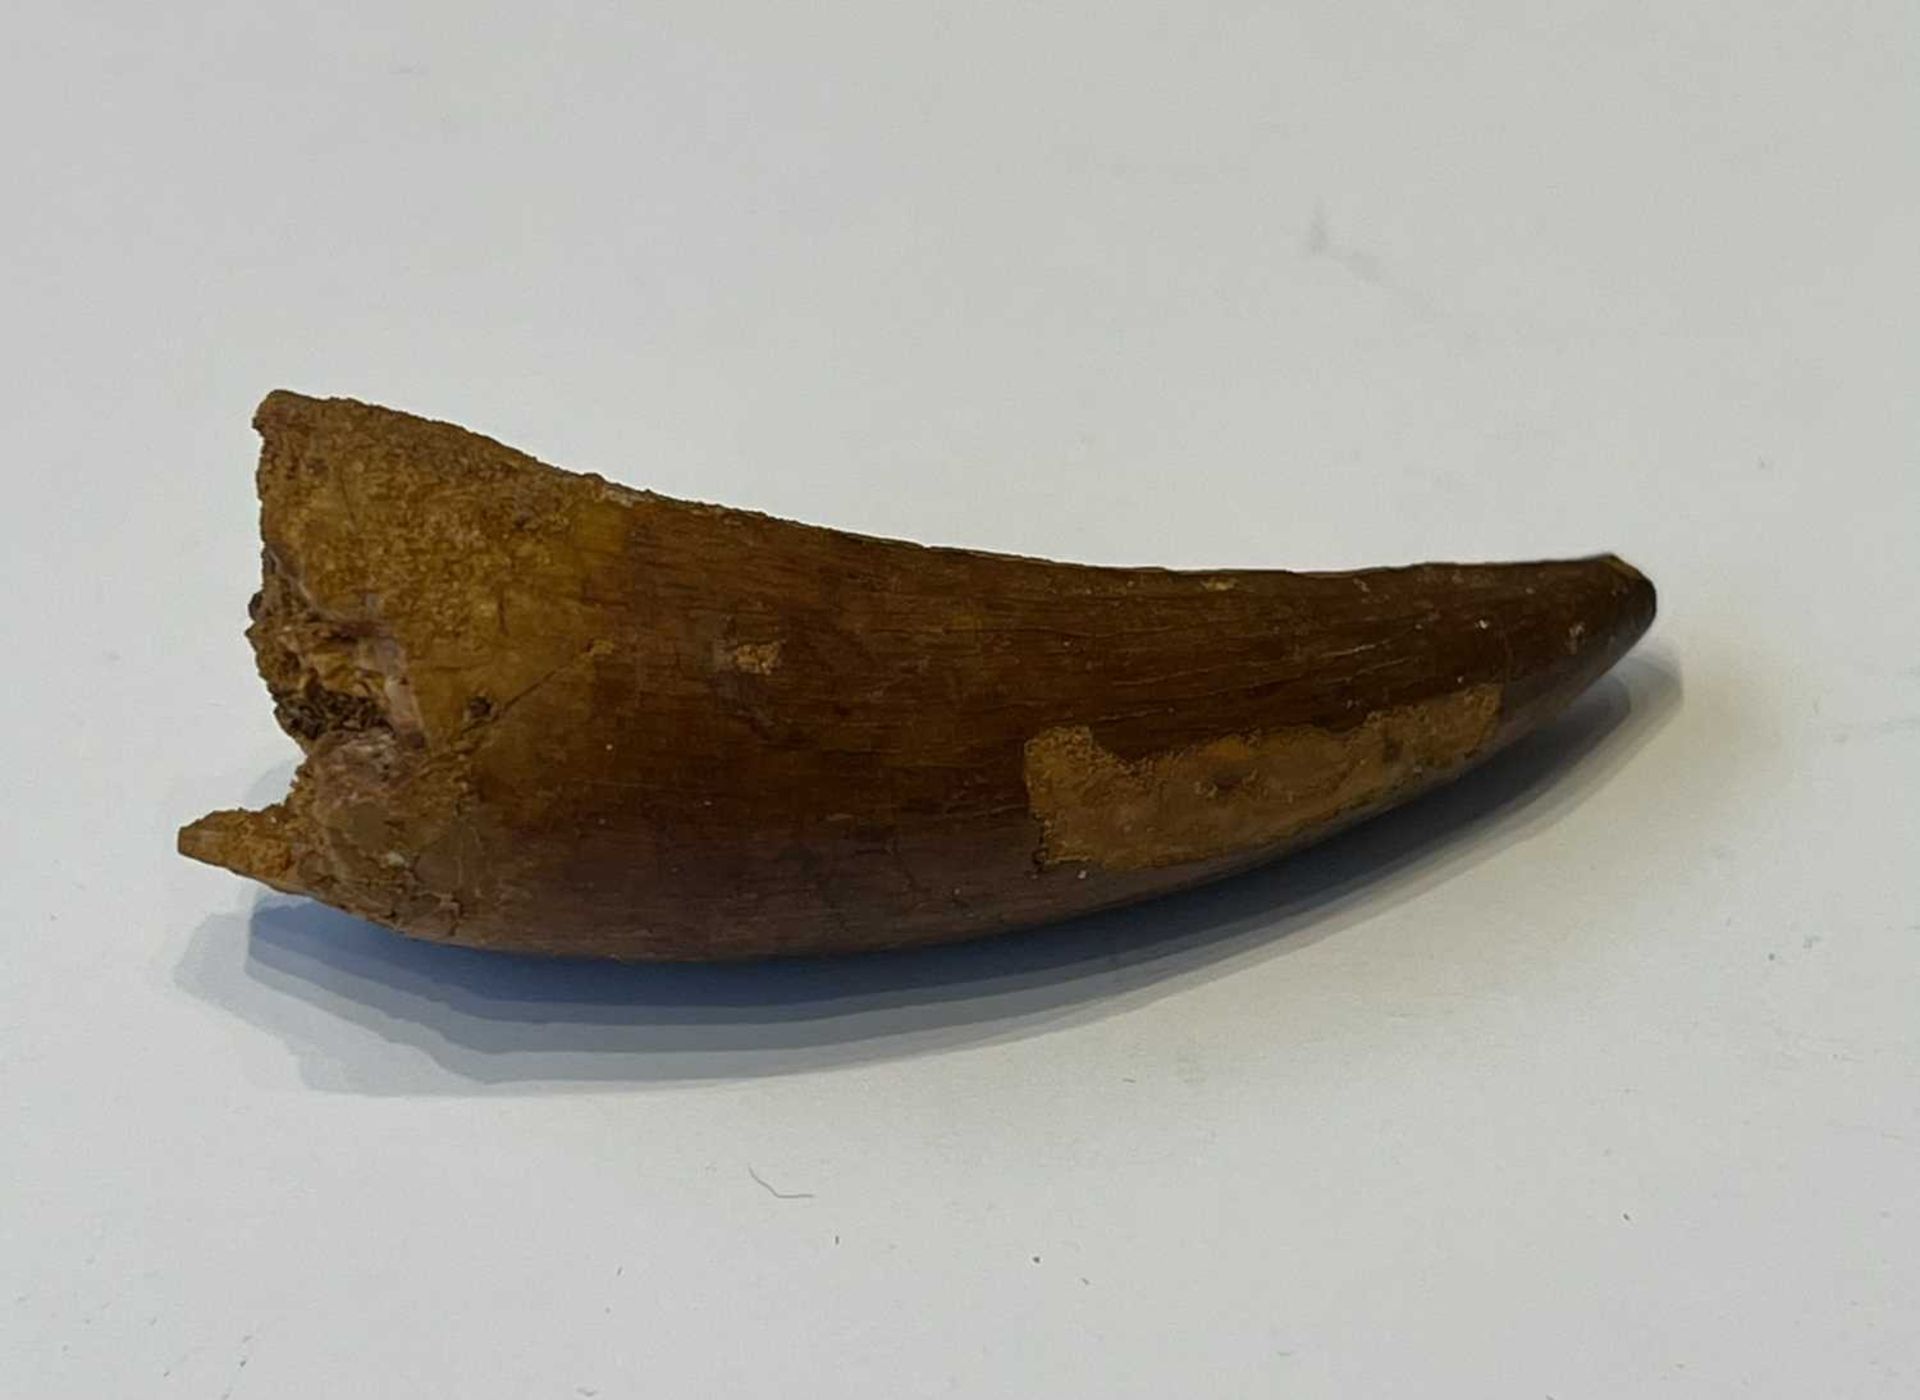 AN EXTINCT ‘SARCOSUCHUS’ CROCODILE ‘SUPERCROC’ TOOTH, LATE CRETACEOUS, 100 MILLION YEARS - Image 6 of 6